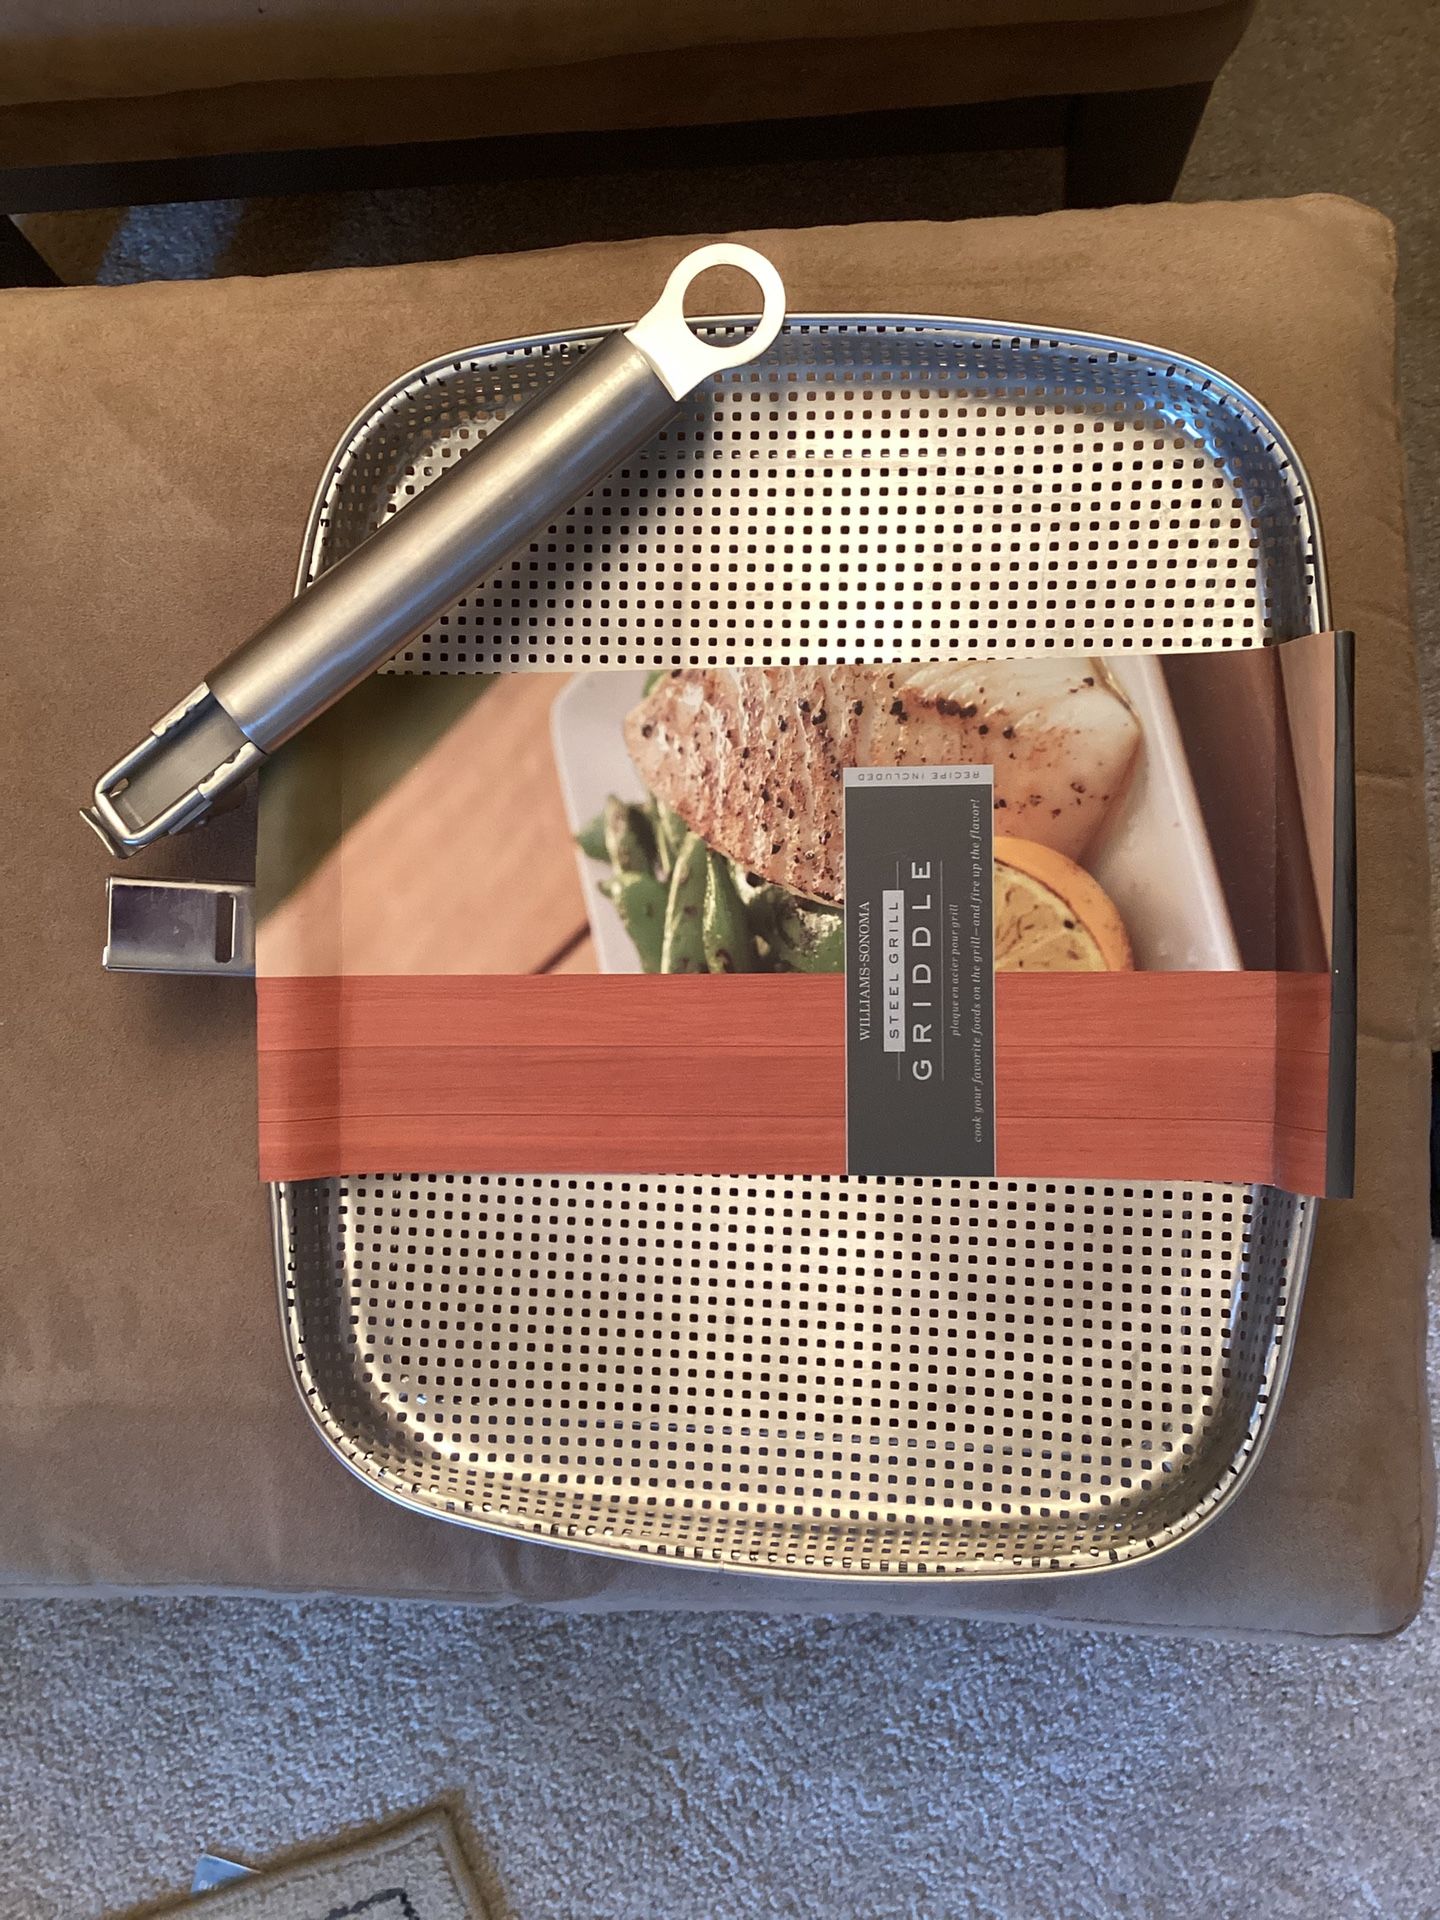  New Stainless Steele Grill/Griddle By William-Sonoma